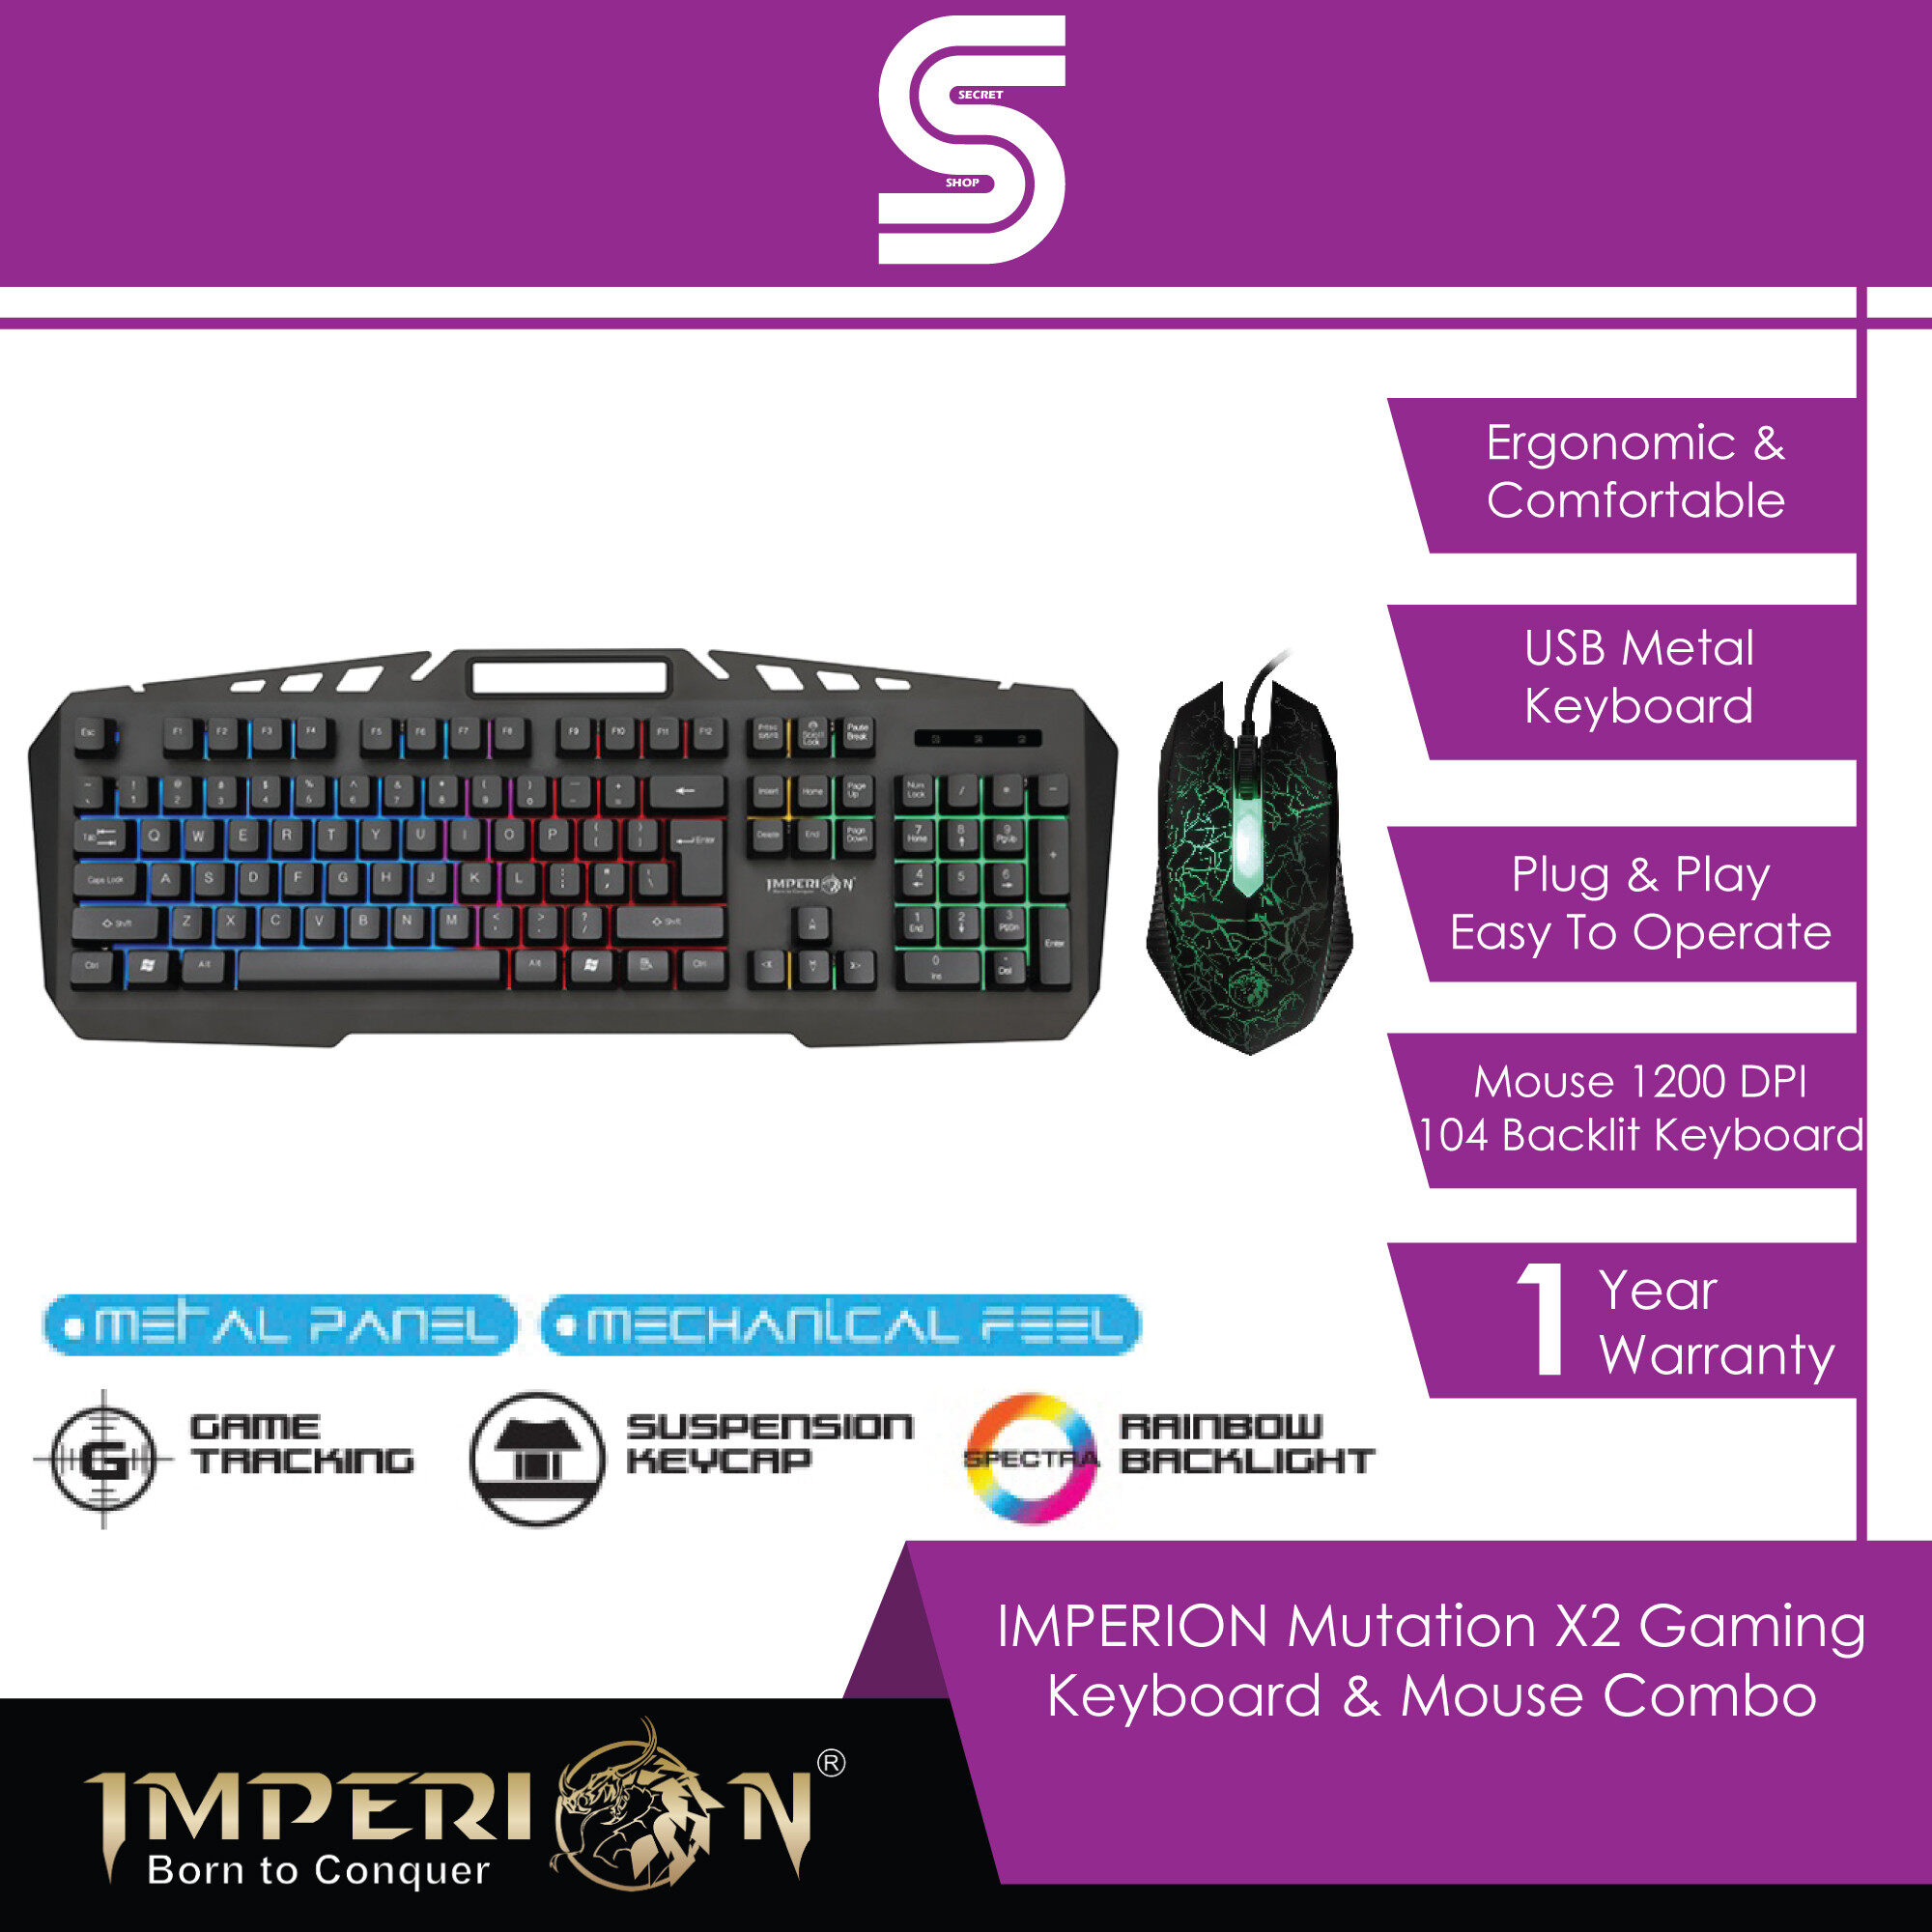 IMPERION Mutation X2 Gaming Keyboard & Mouse Combo